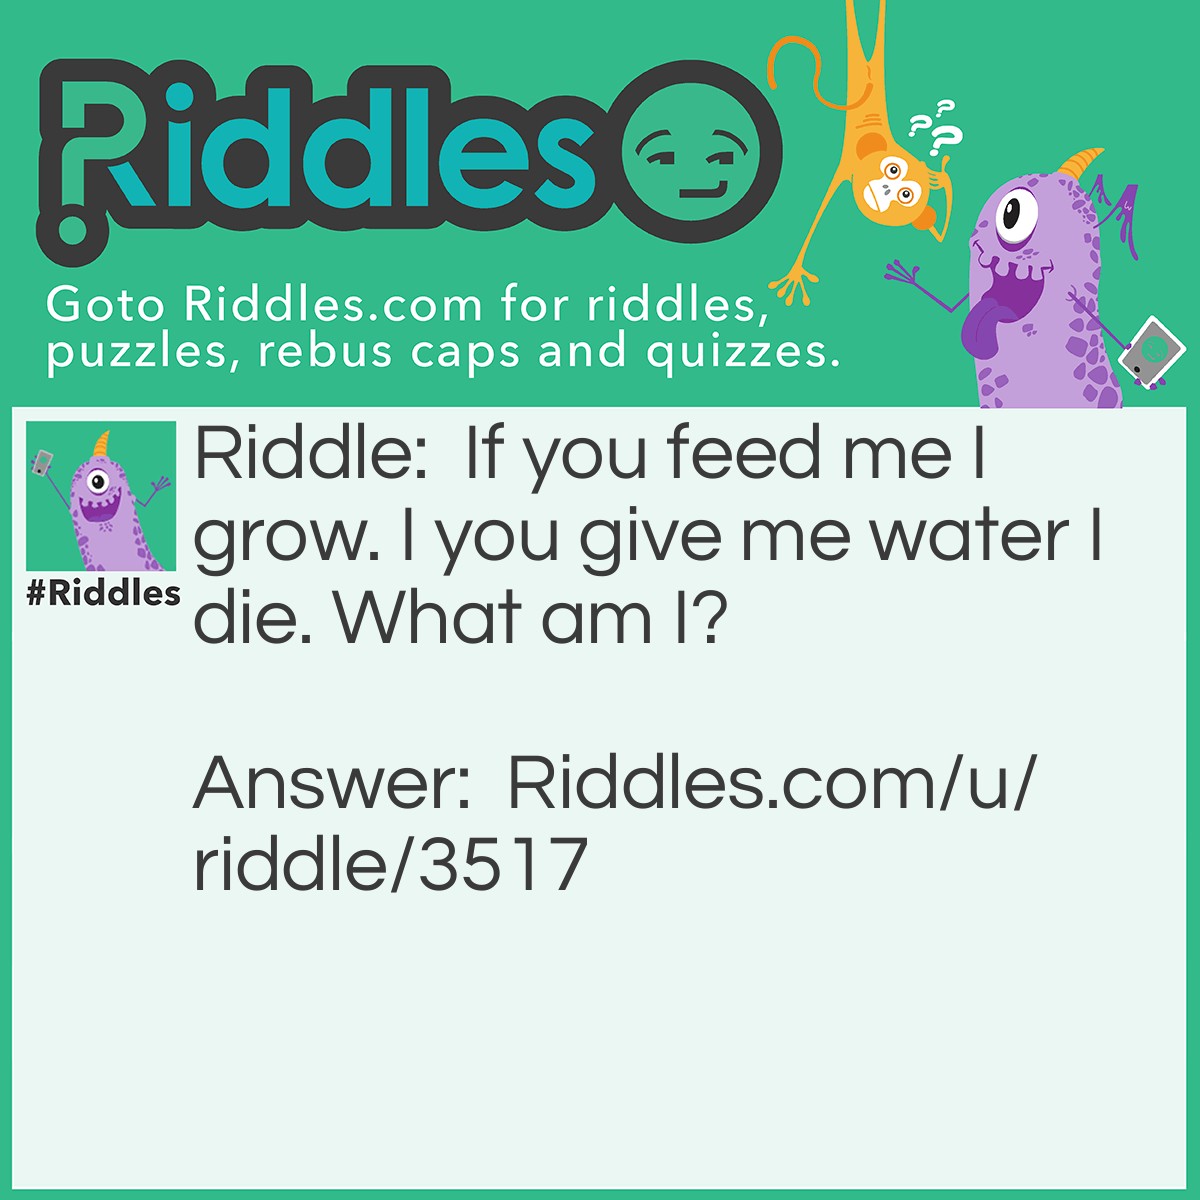 Riddle: If you feed me I grow. I you give me water I die. What am I? Answer: Fire.